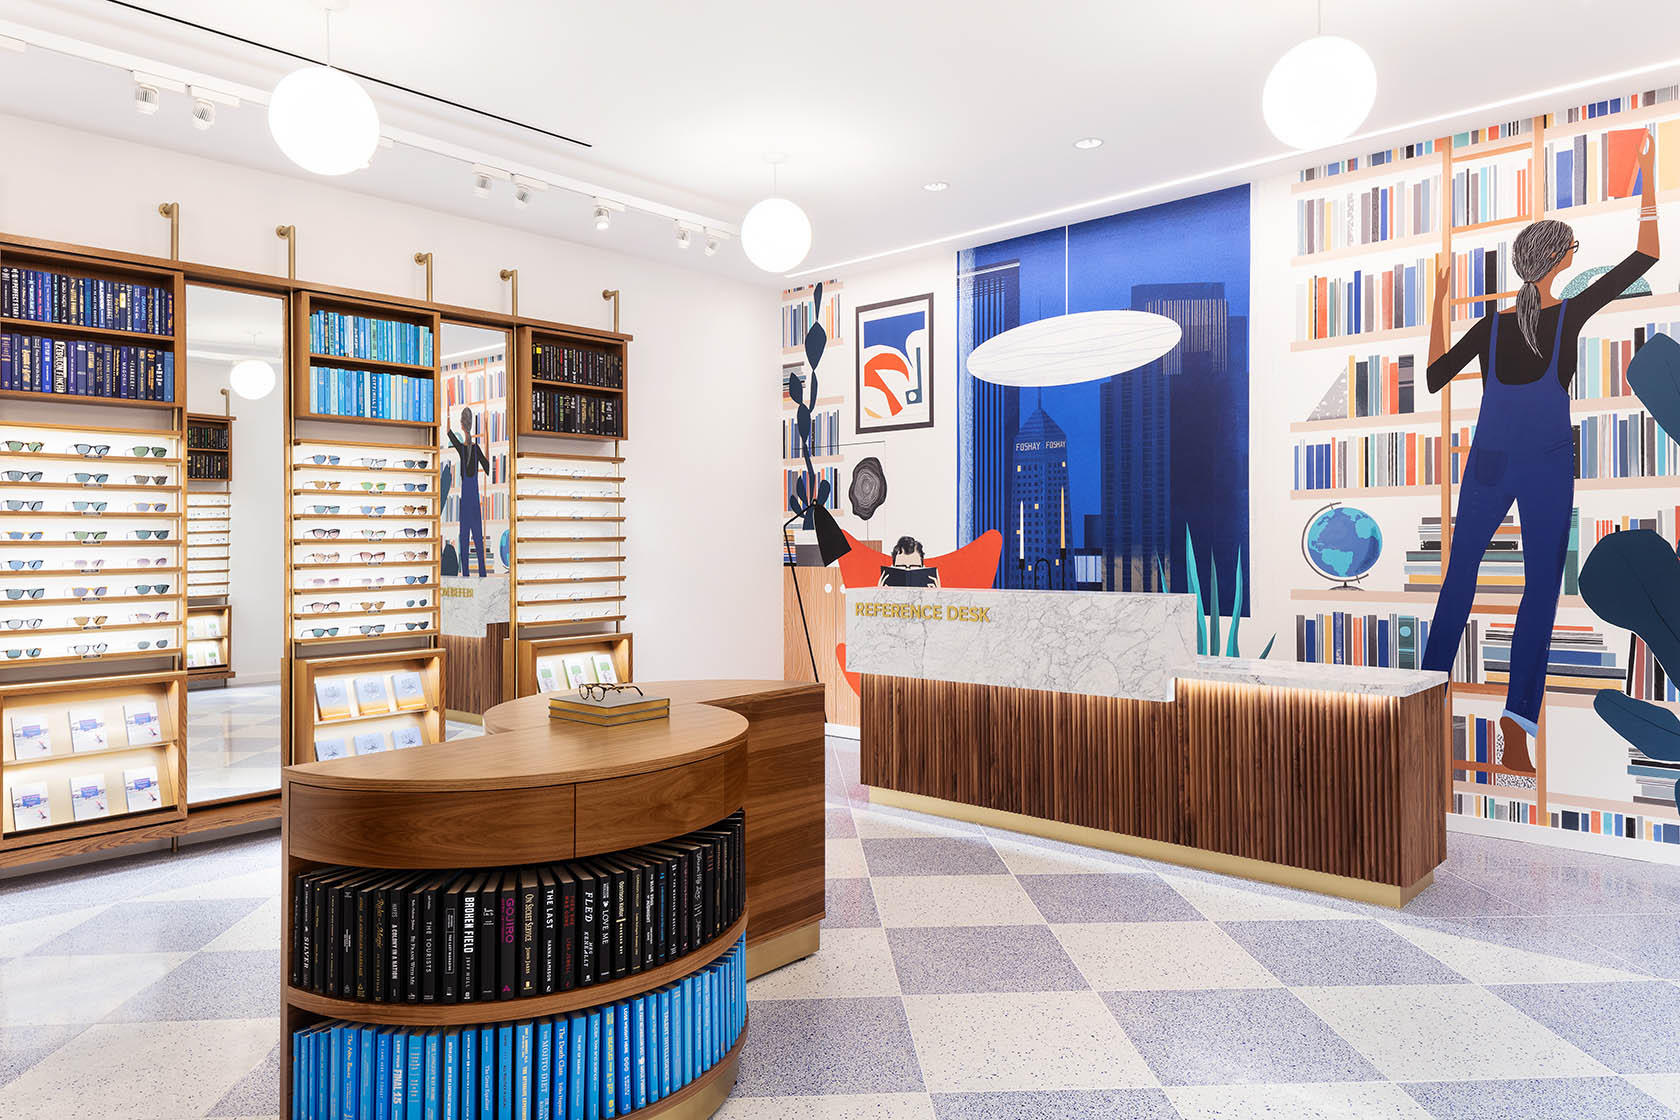 Warby Parker Galleria Edina: Shop glasses, sunglasses, and contacts in Edina,  MN